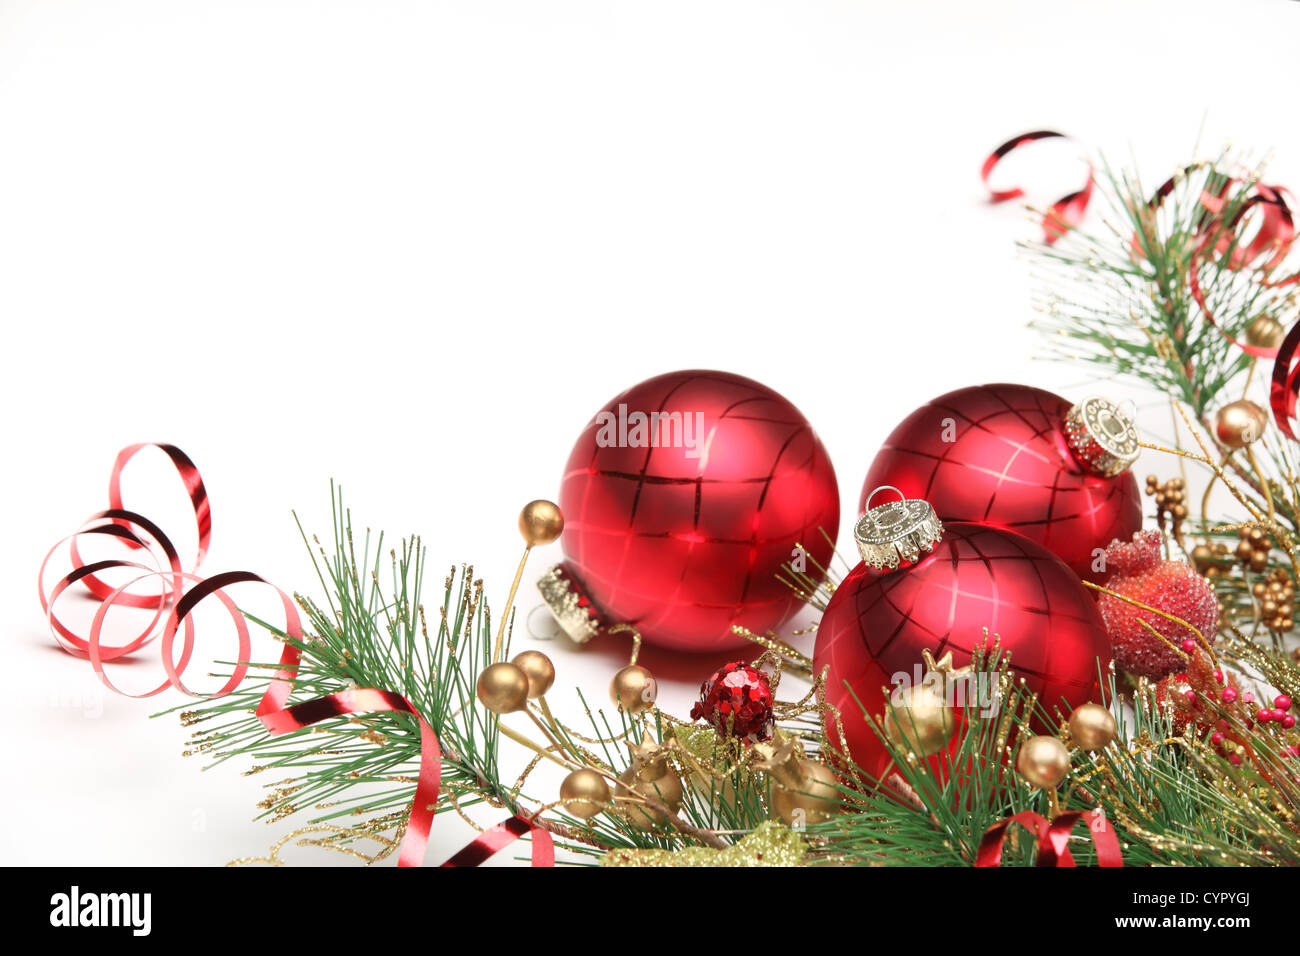 Christmas decoration with balls and fir branch. Stock Photo